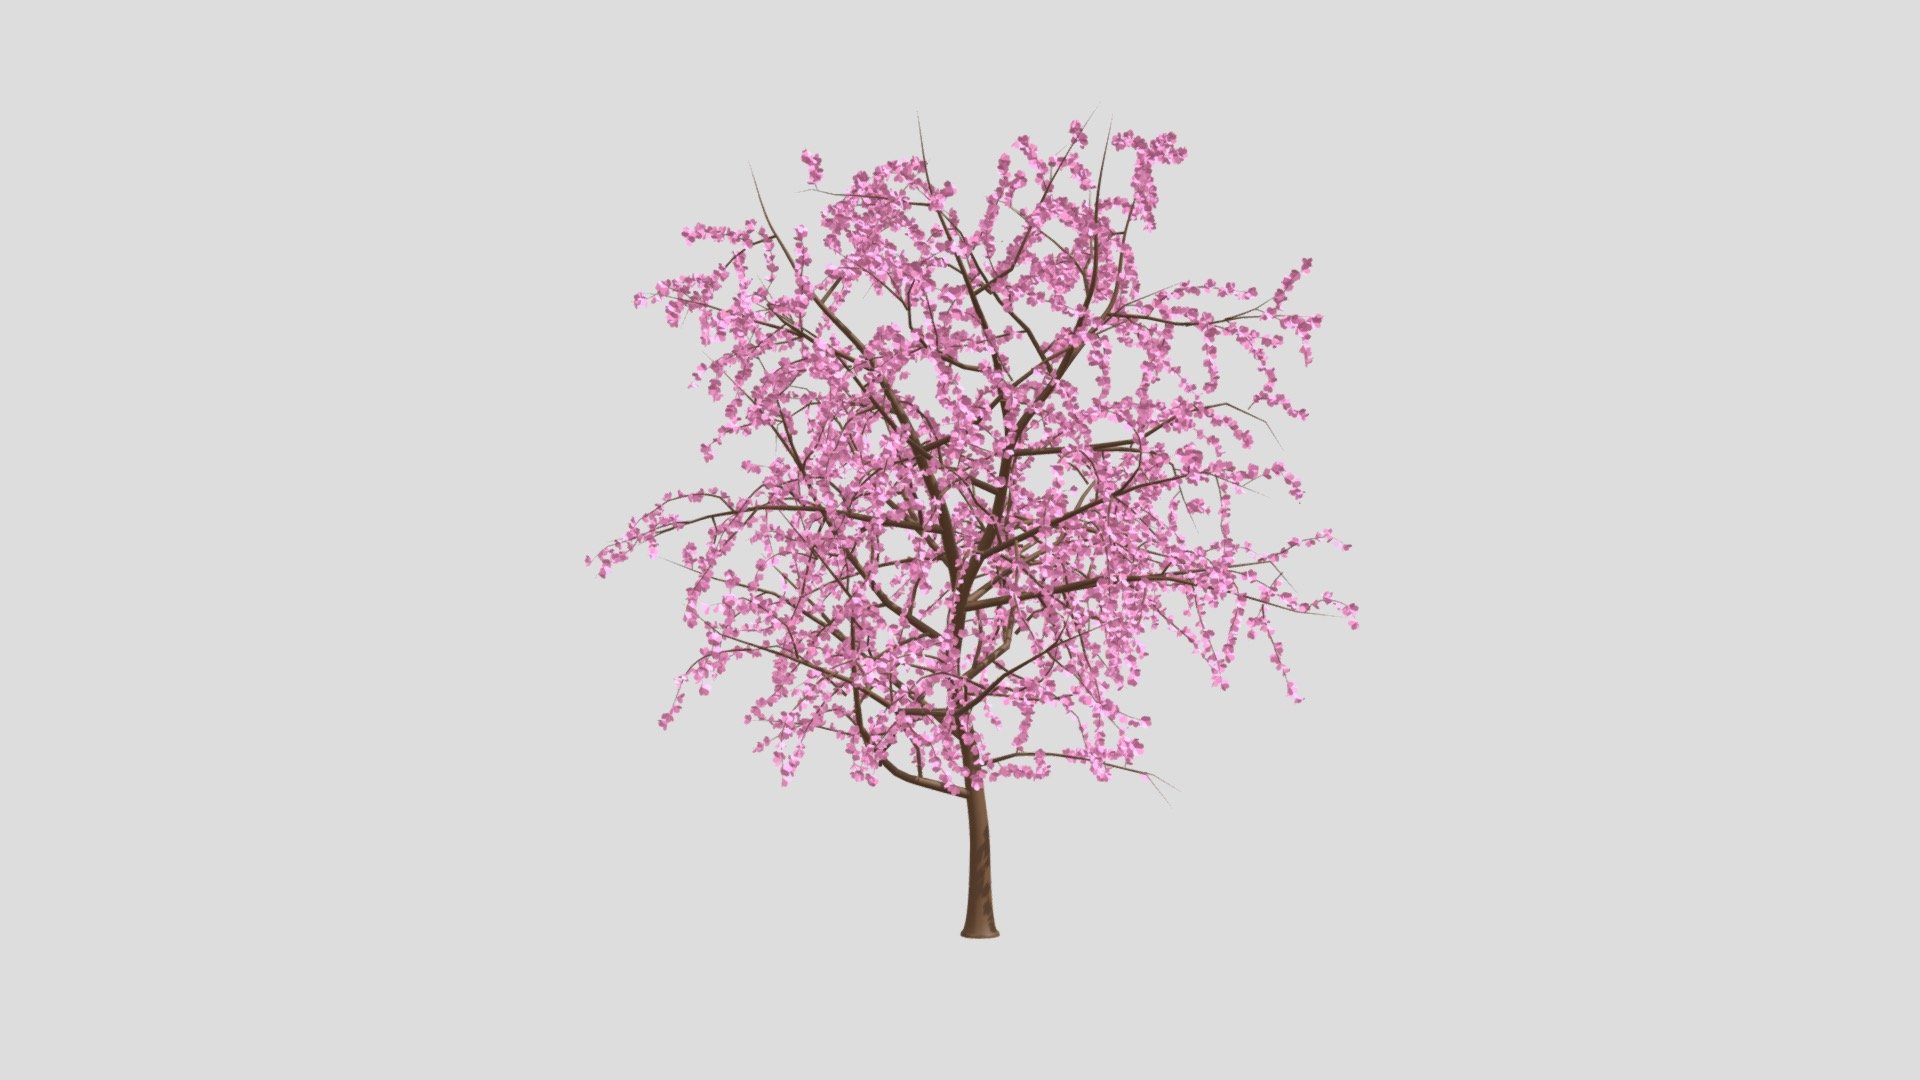 Textures: 1024 × 1024, Colors on texture: Pink and brown.

Materials: 1 - Blossom Tree

Smooth shaded.

Non-Mirrored.

Subdivision Level: 0

Origin located on bottom-center.

Rigged.

Polygons: 204158

Vertices: 165960

Formats: Fbx, Obj, Stl, Dae.

I hope you enjoy the model! - Blossom Tree - Buy Royalty Free 3D model by Ed+ (@EDplus) 3d model